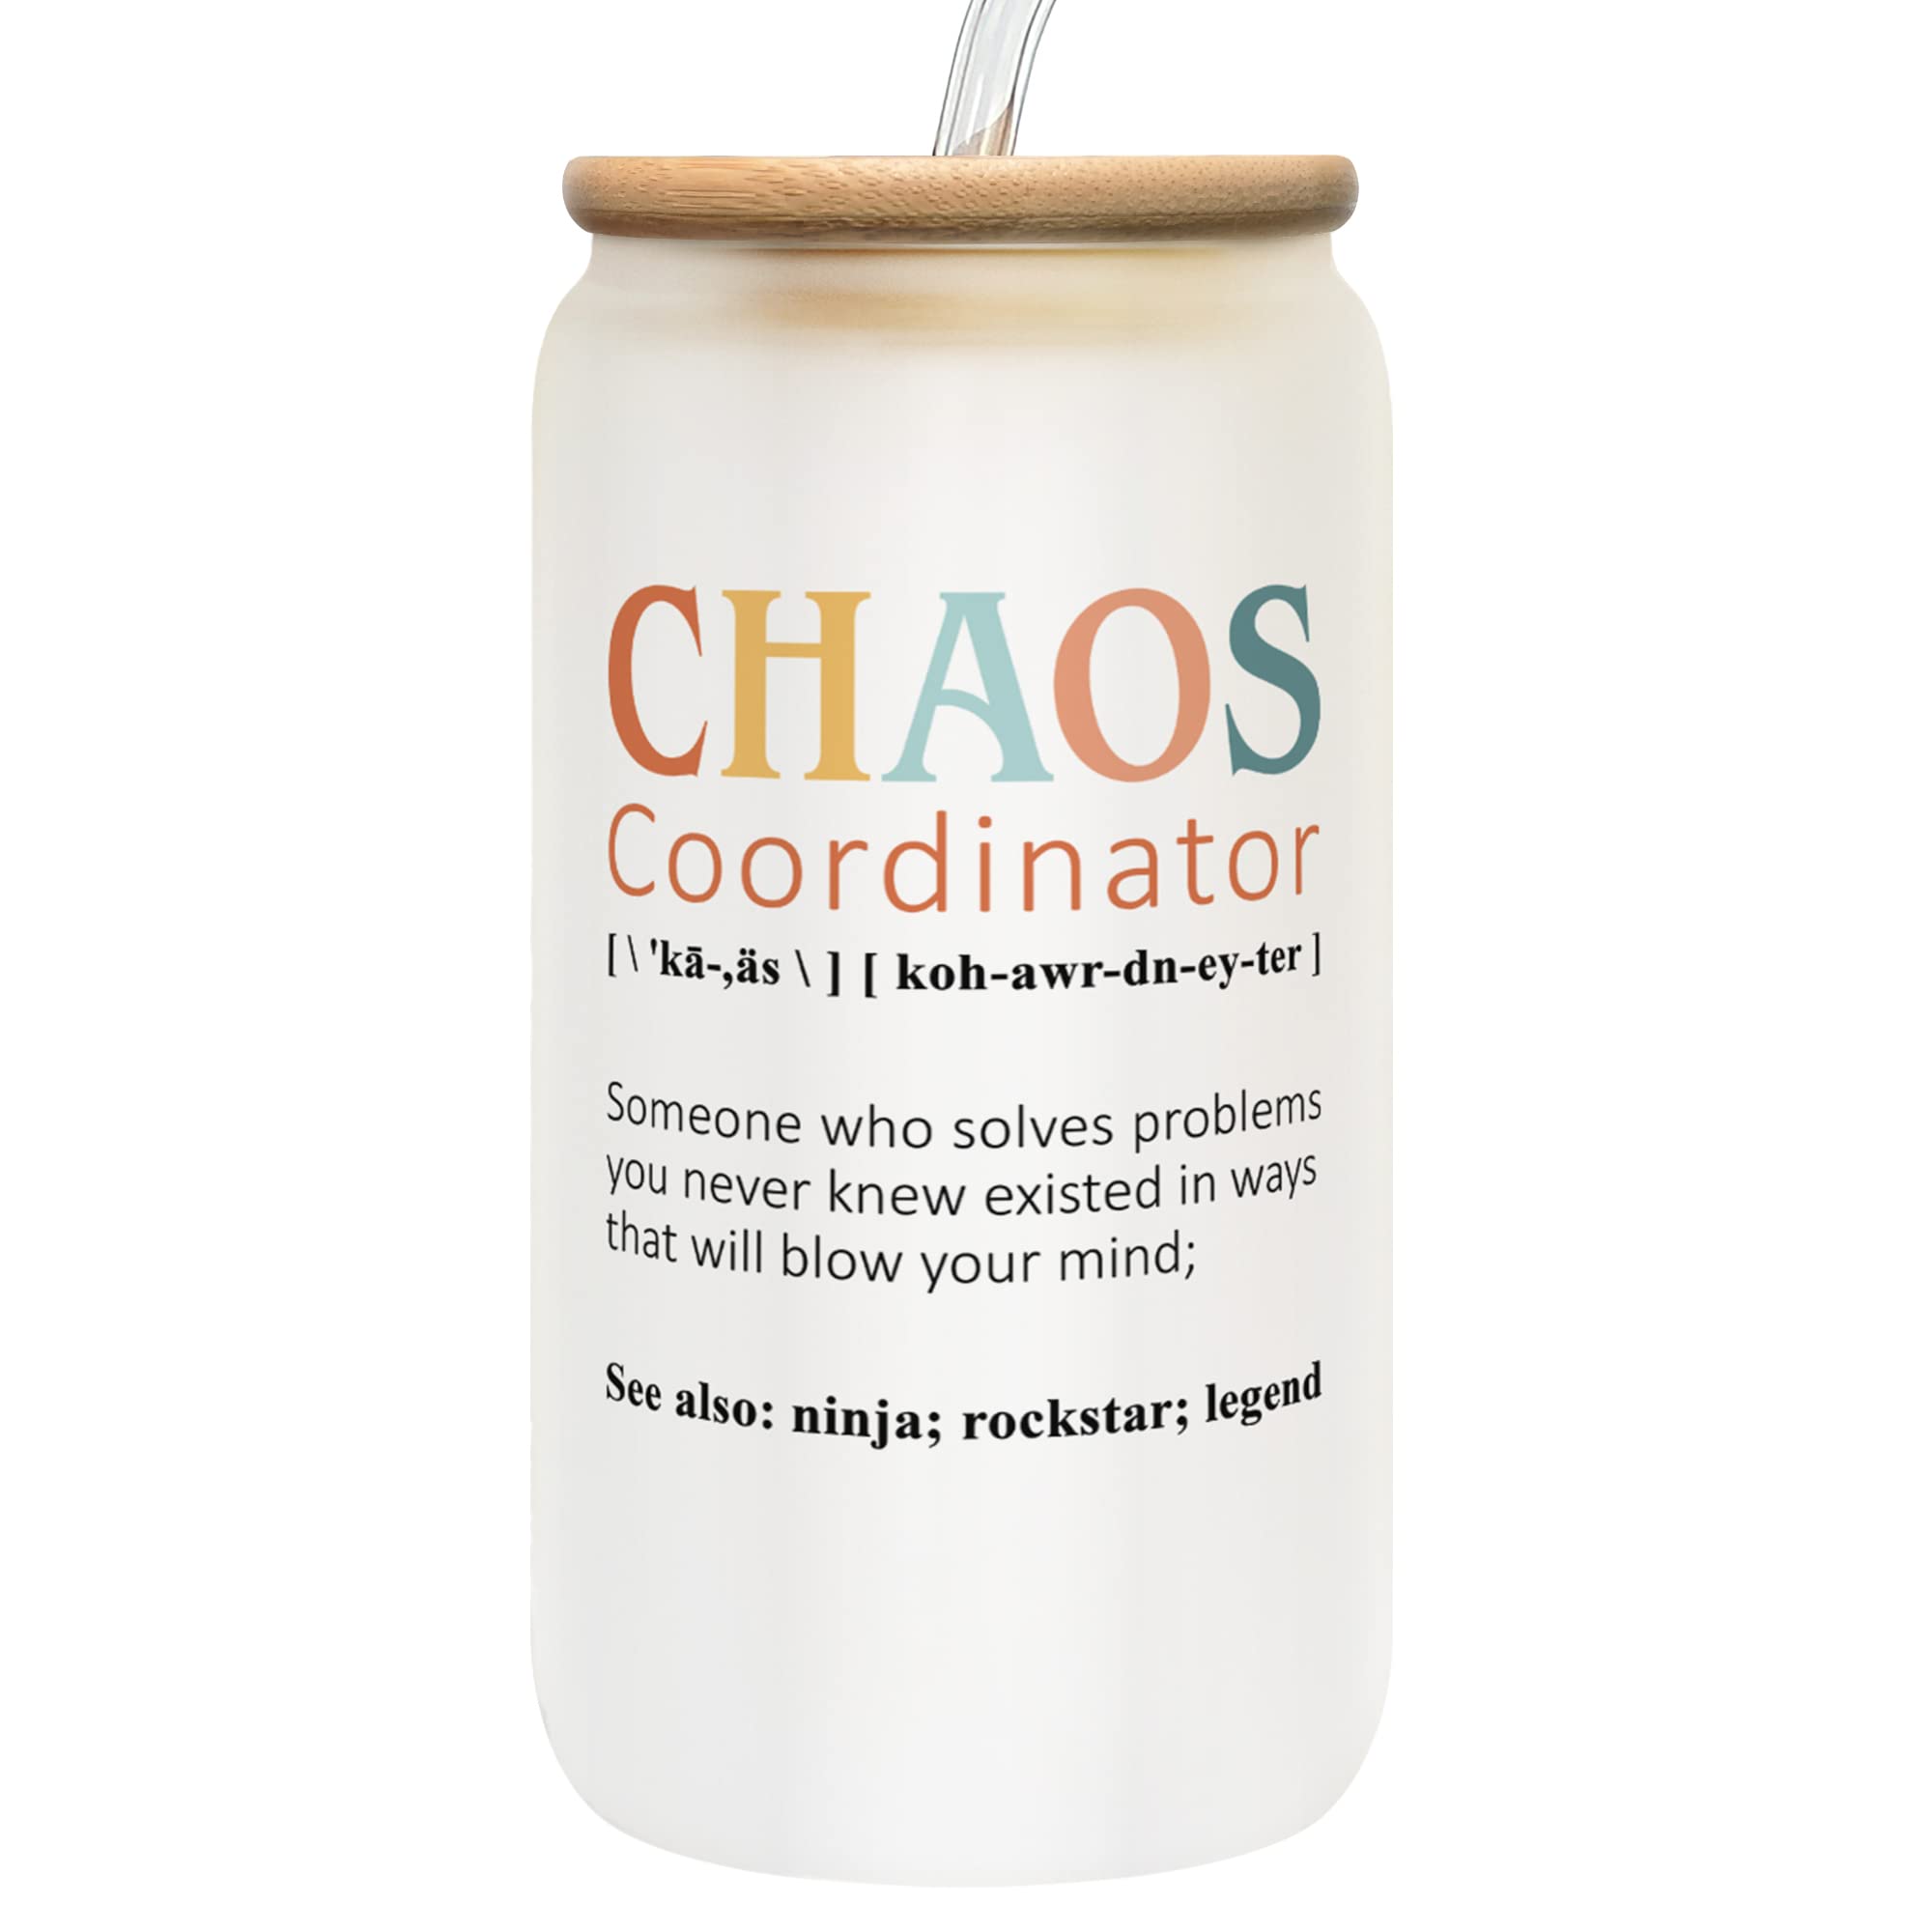 Thank You Gifts for Women, Boss, Coworker, Manager, Her, Teacher - Chaos Coordinator Gifts - Boss Lady Gifts, Coworker Gifts, Office Gifts - Administrative Professional Day Gifts - 16 Oz Can Glass